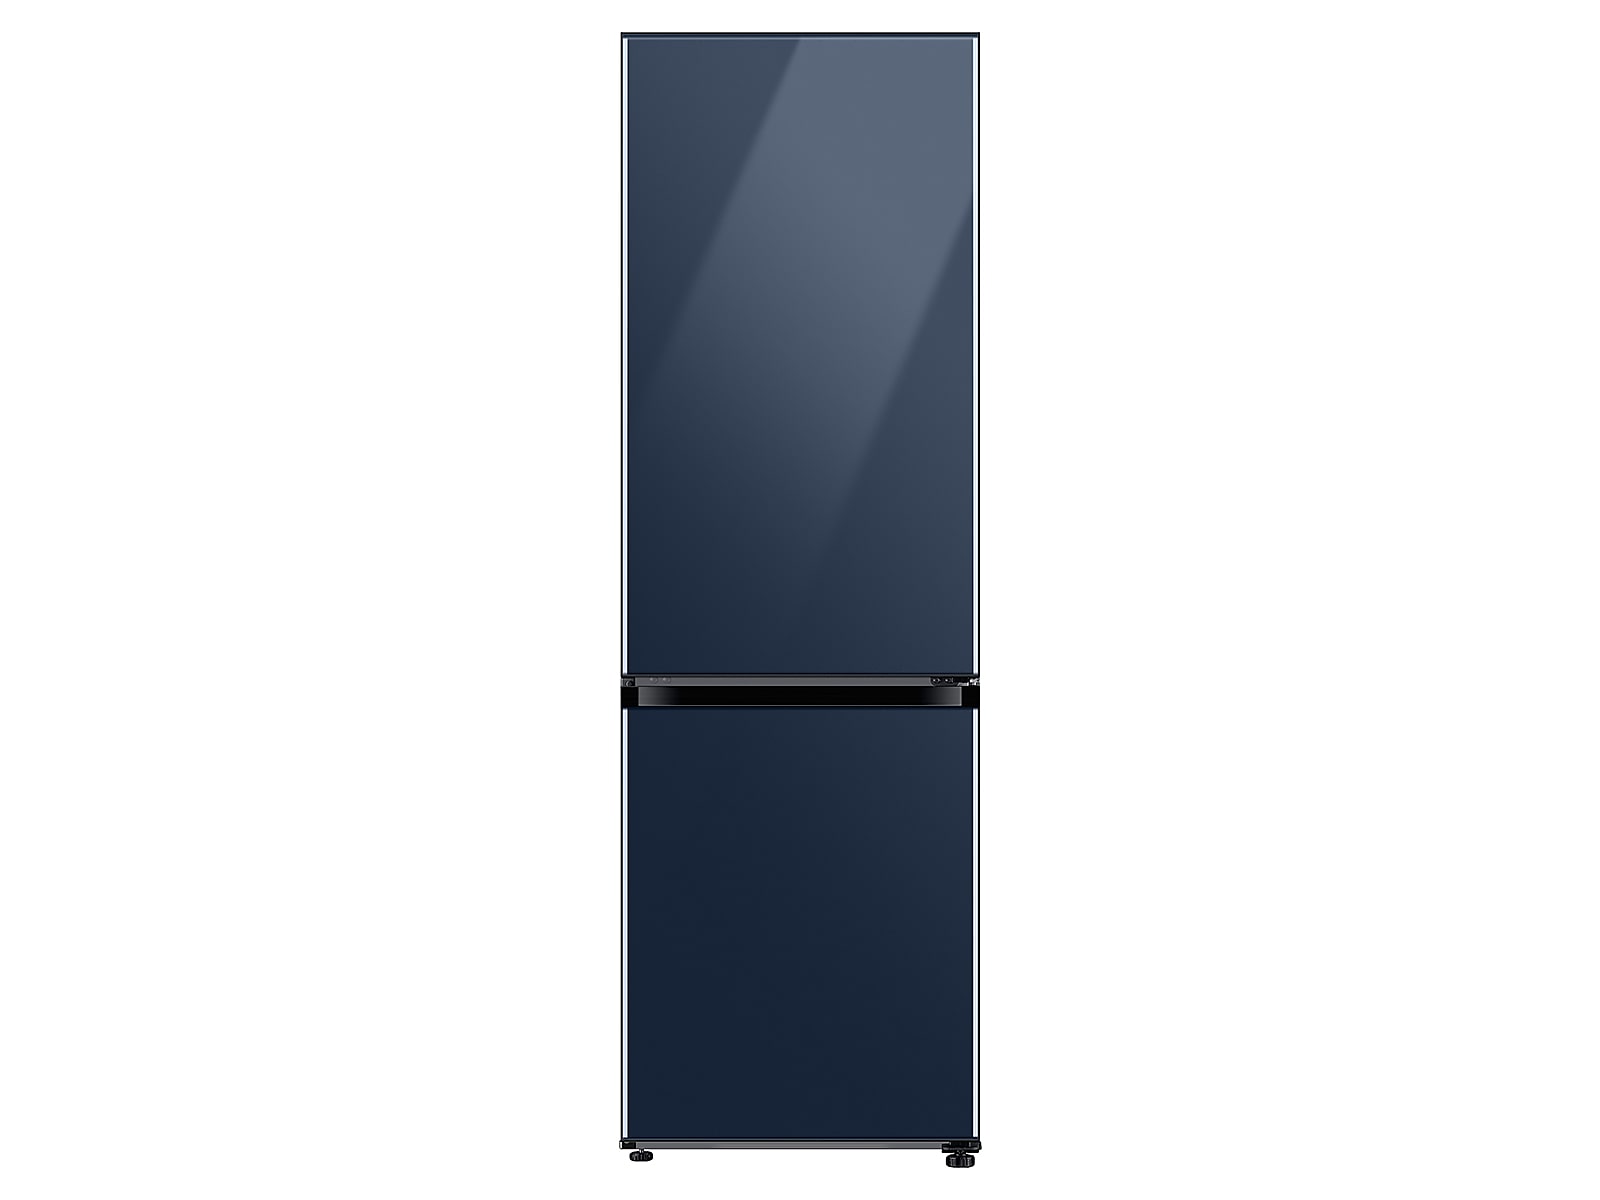 Samsung 12.0 cu. Ft. Bespoke Bottom Freezer Refrigerator with Flexible Design in Navy Blue Glass(RB12A300641/AA) photo